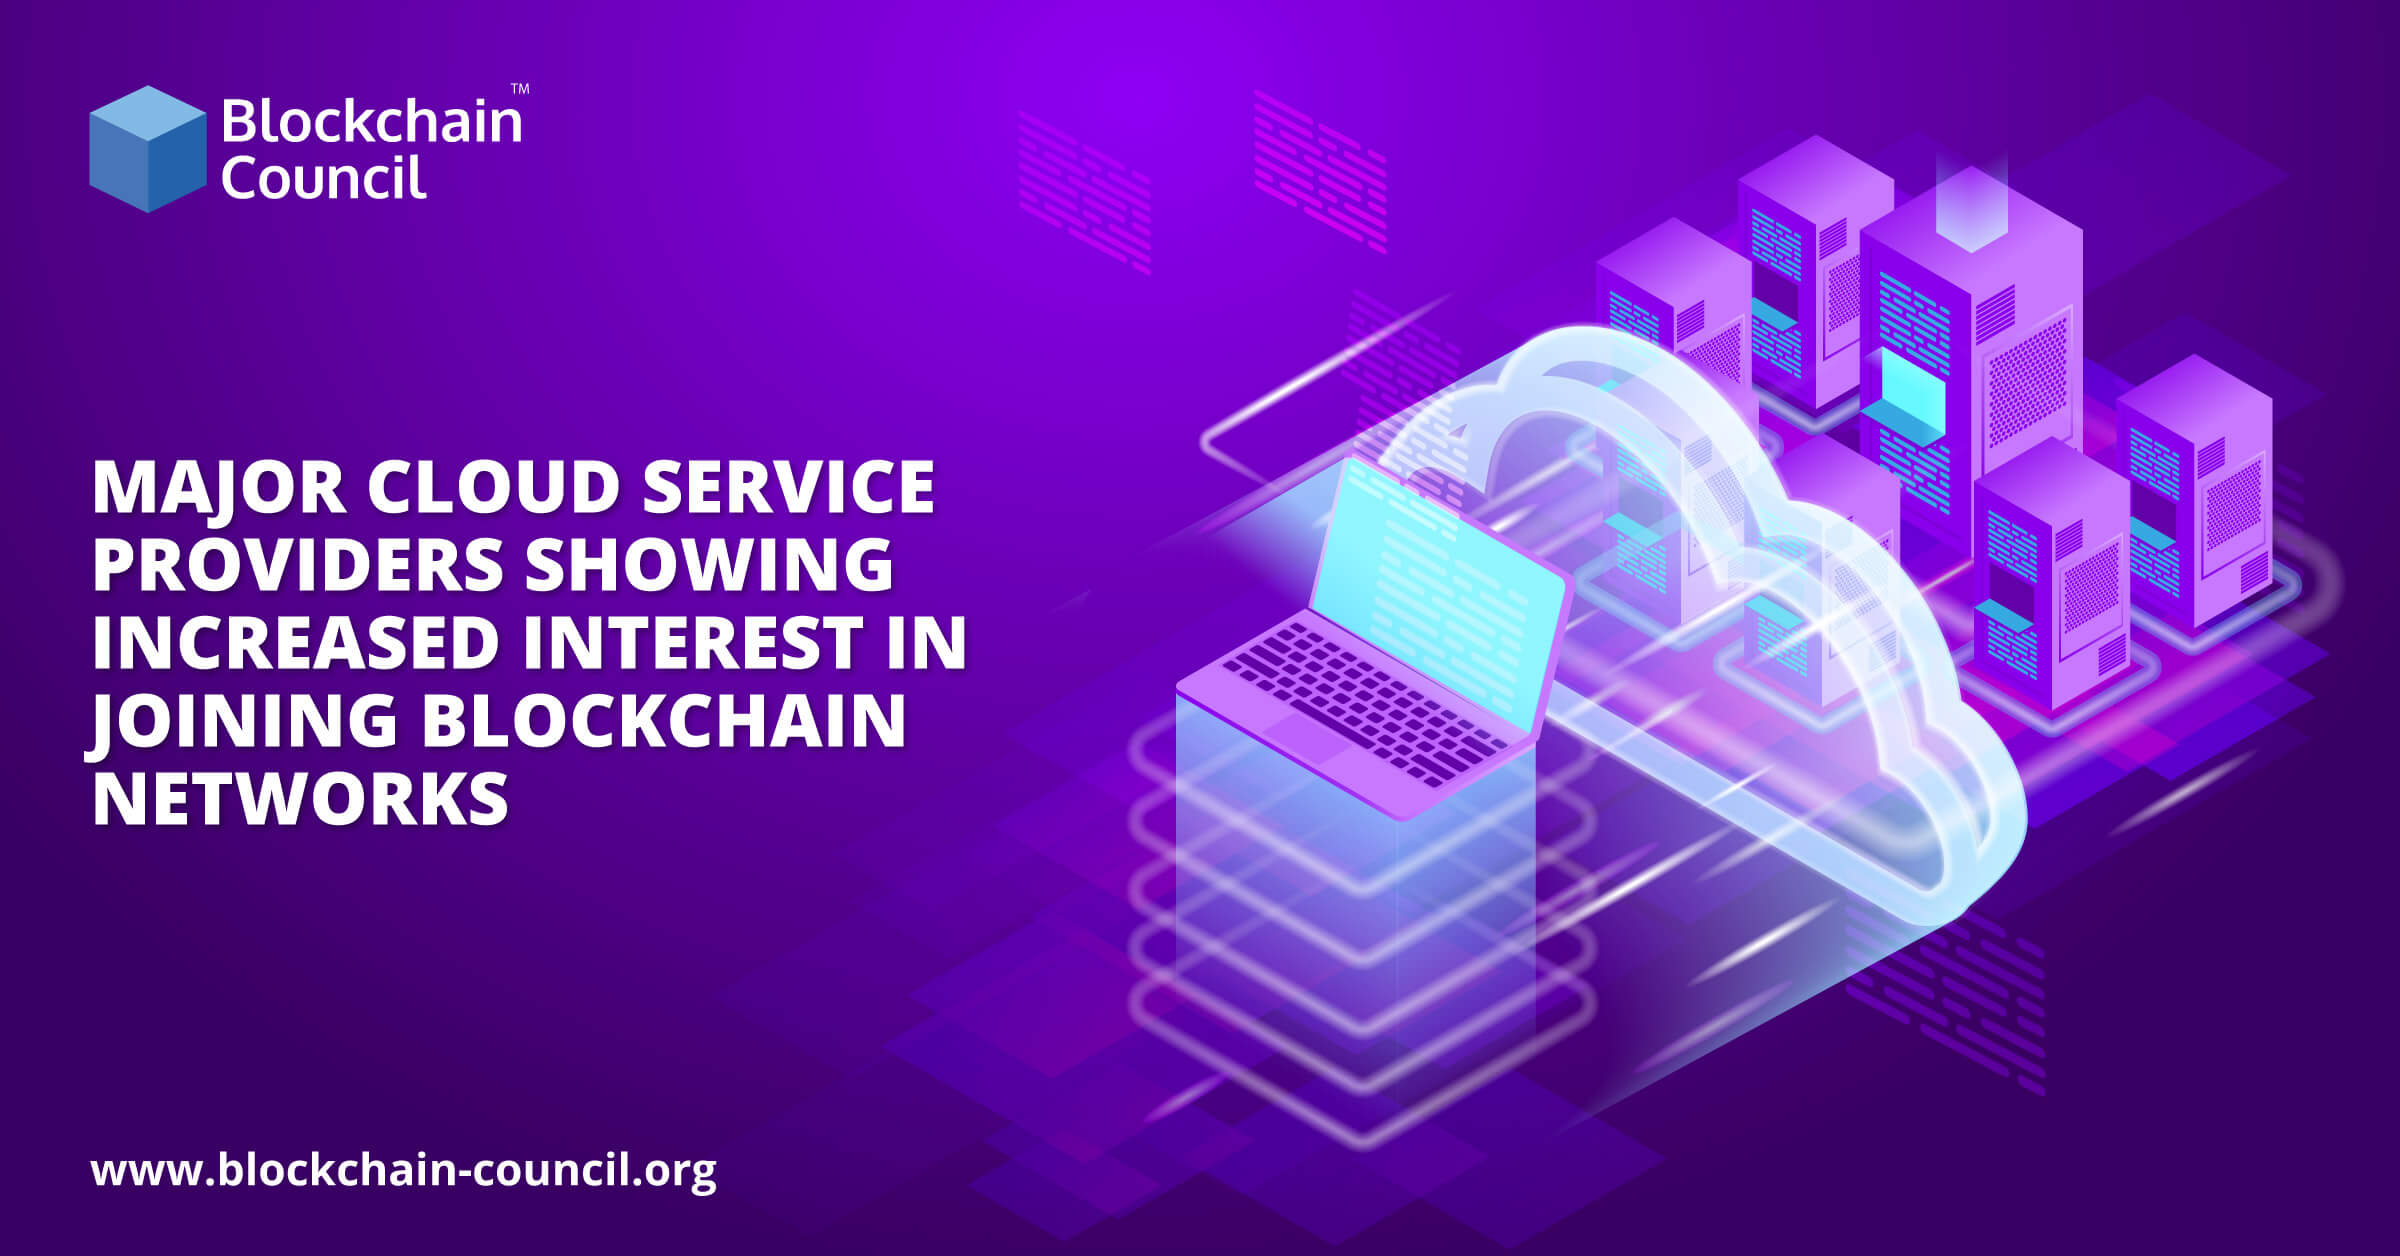 Major Cloud Service Providers Showing Increased Interest in Joining Blockchain Networks